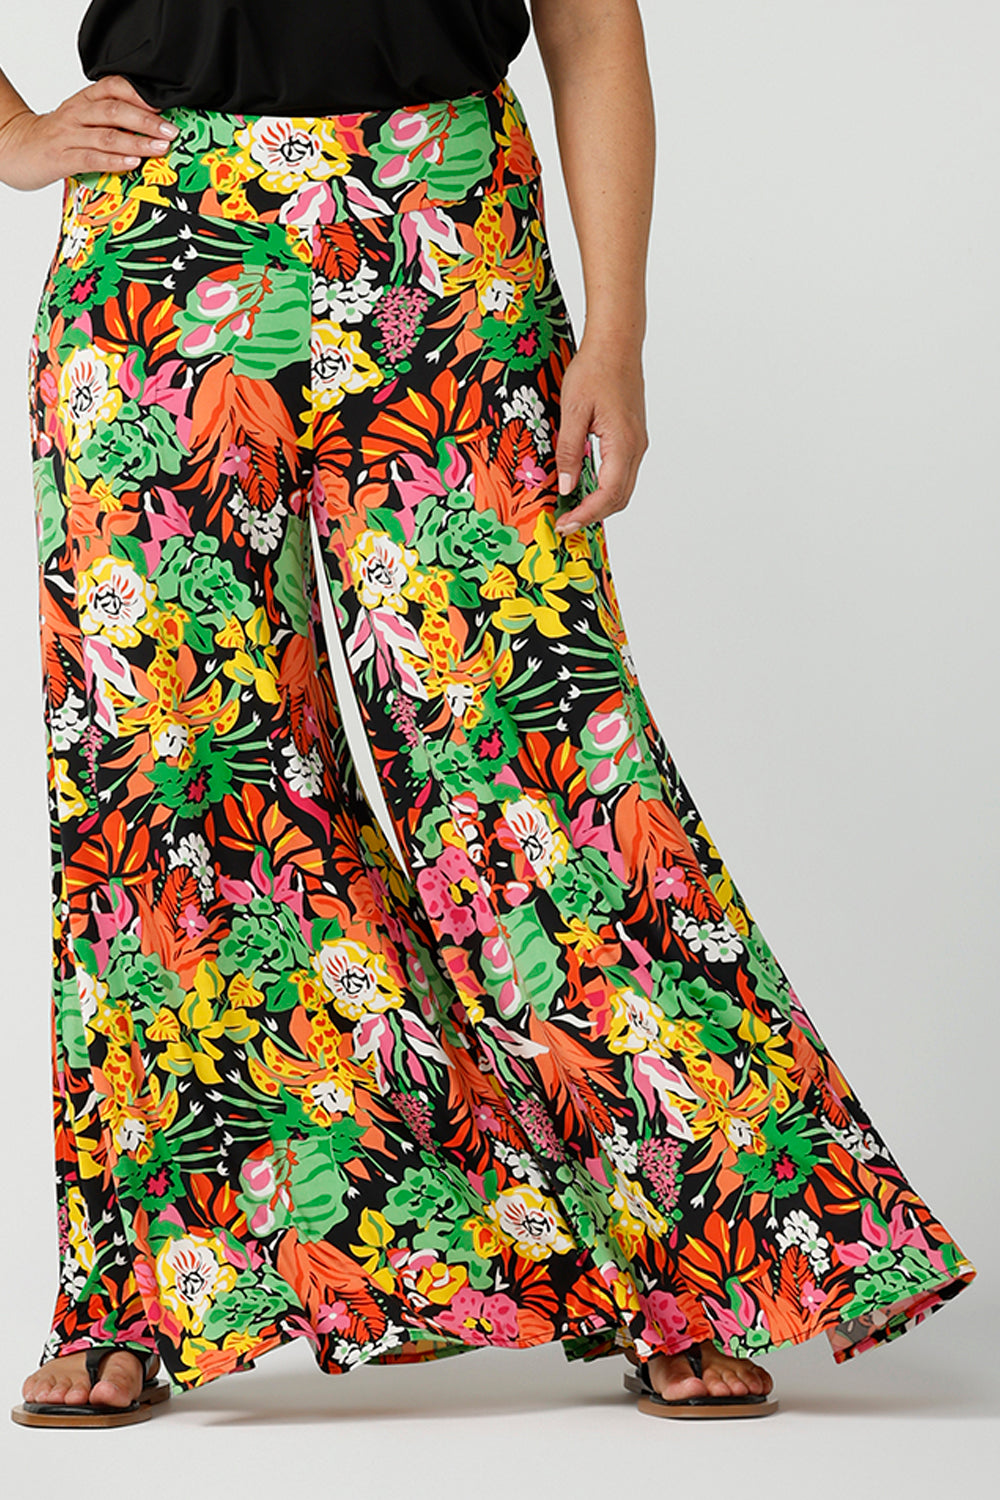 Close up of a size 12 woman wearing the Caspian Palazzo pant n a beautiful bright colourful print. In soft and lightweight jersey this pant features side pocket and a wide leg opening. Styled back with a black cami top and flat sandals. A perfect look for weekend wear. Made in Australia size 8-24.